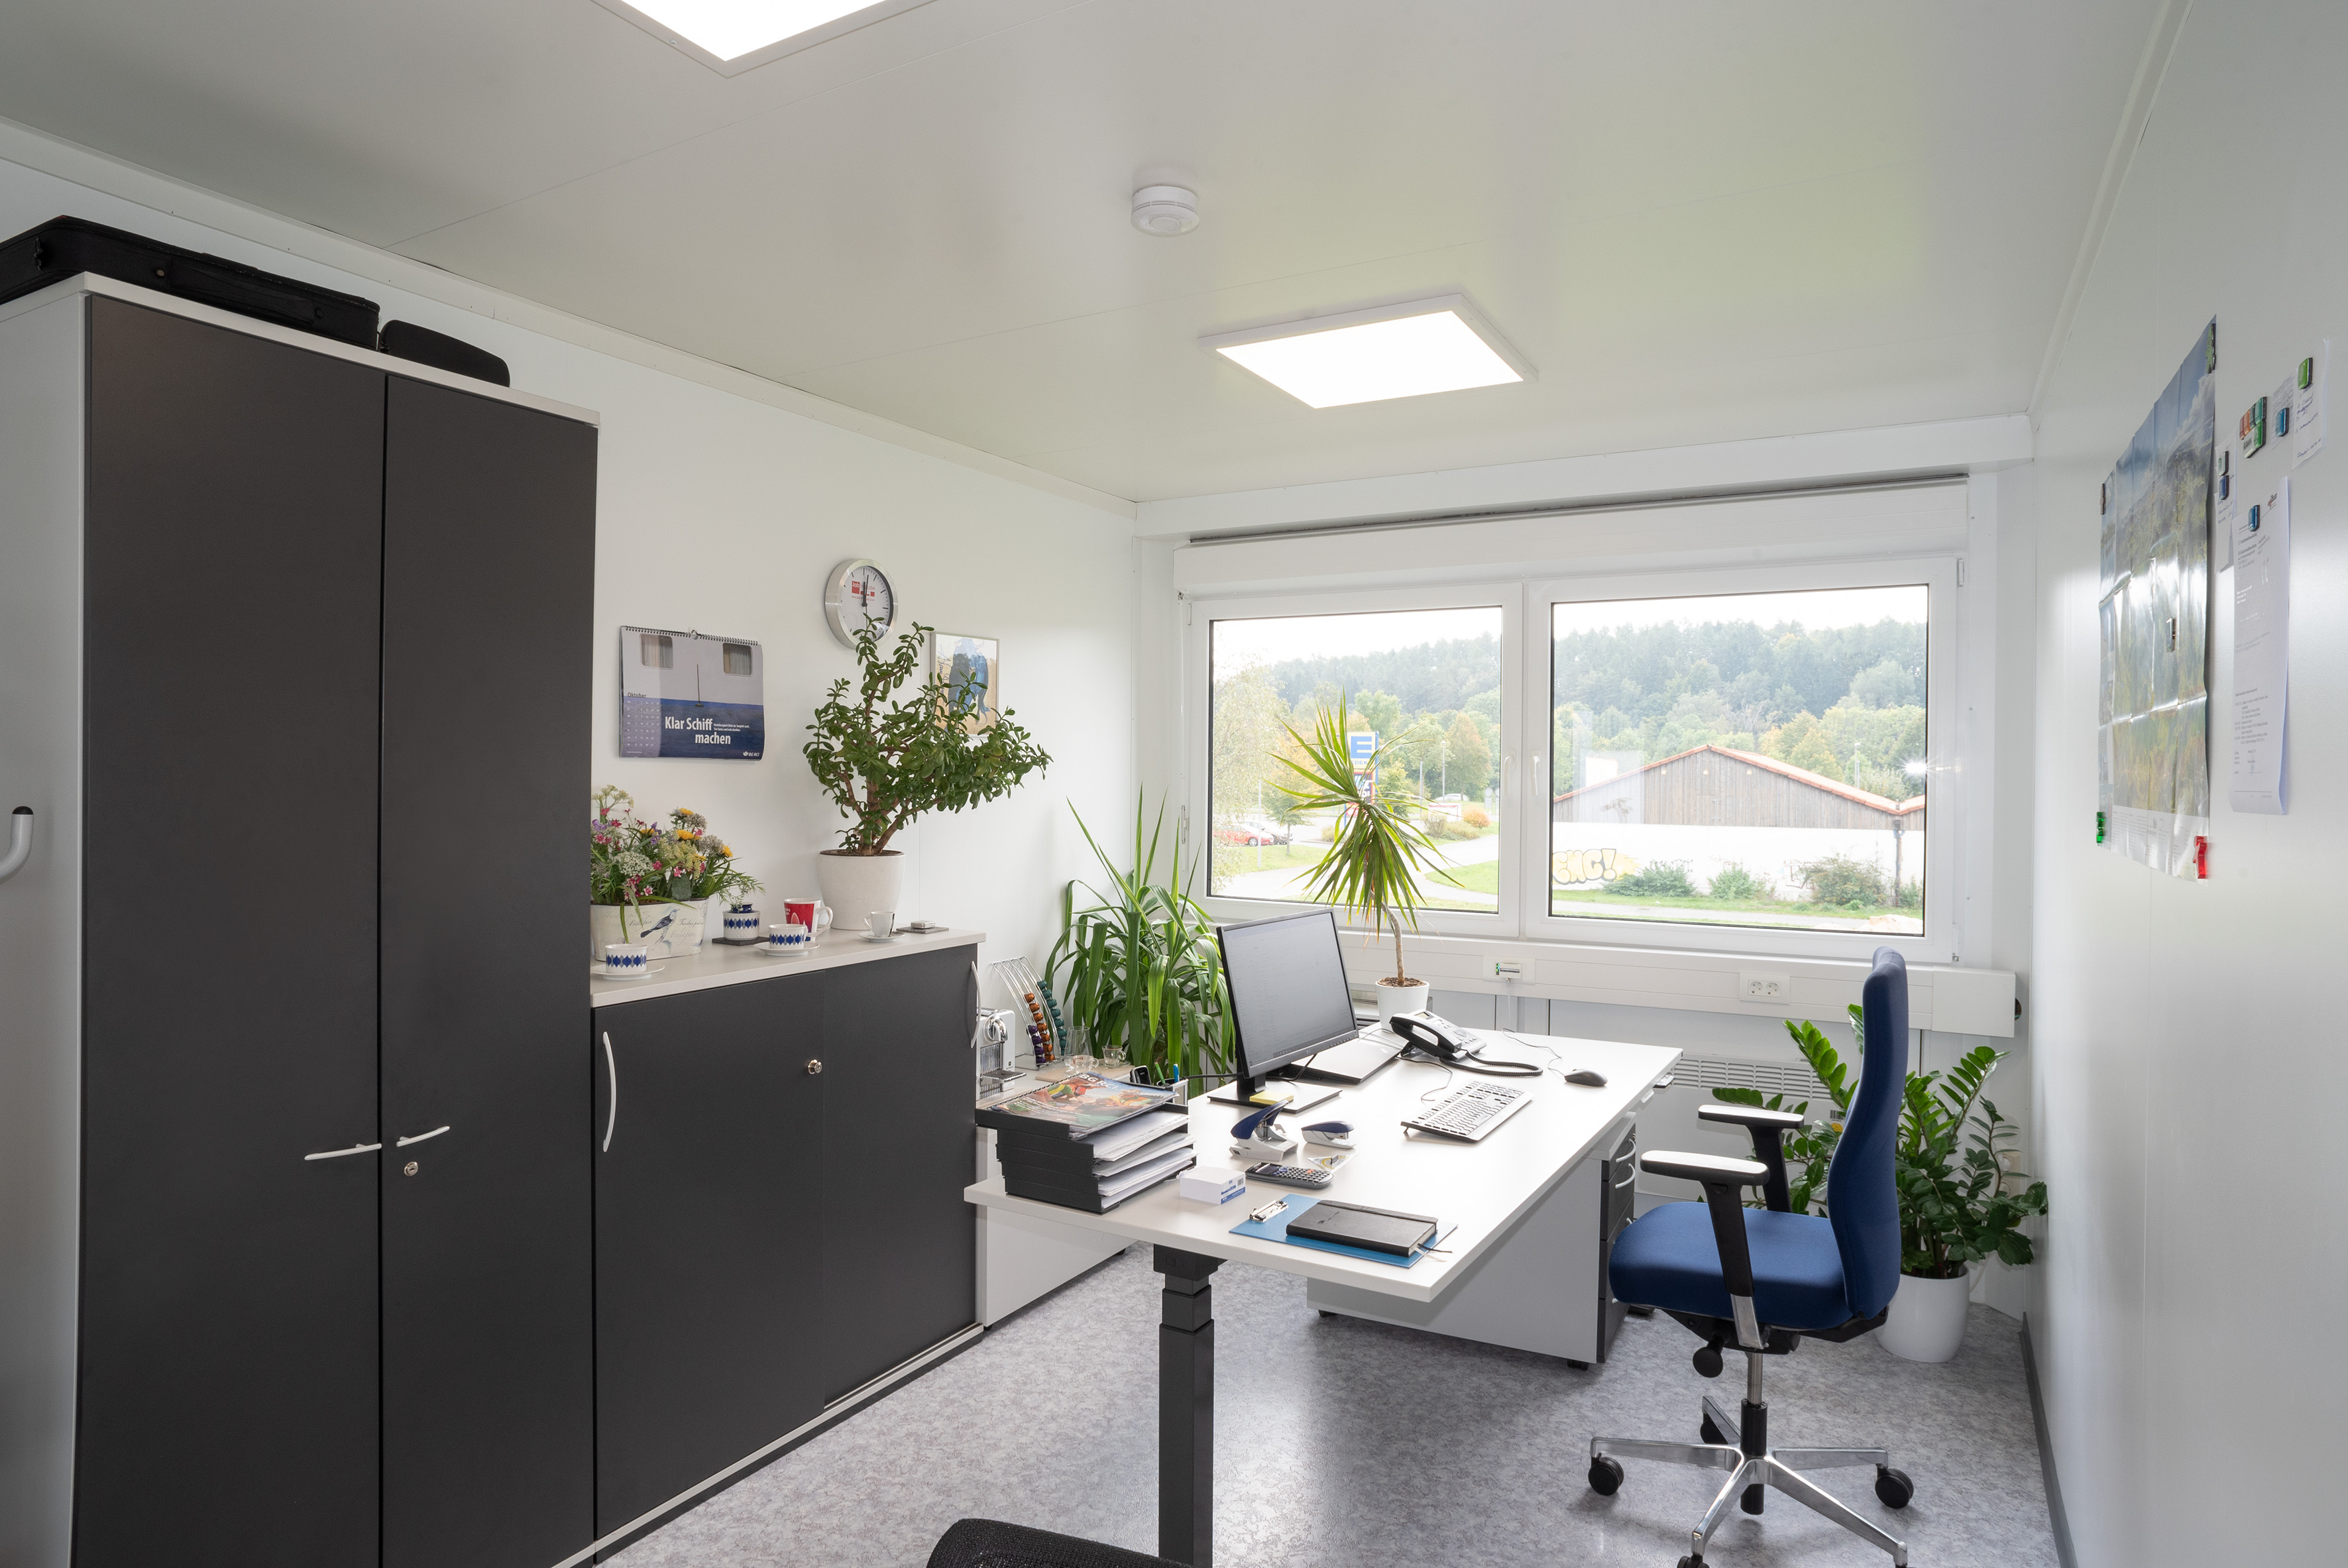 The offices create a bright and pleasant working atmosphere.